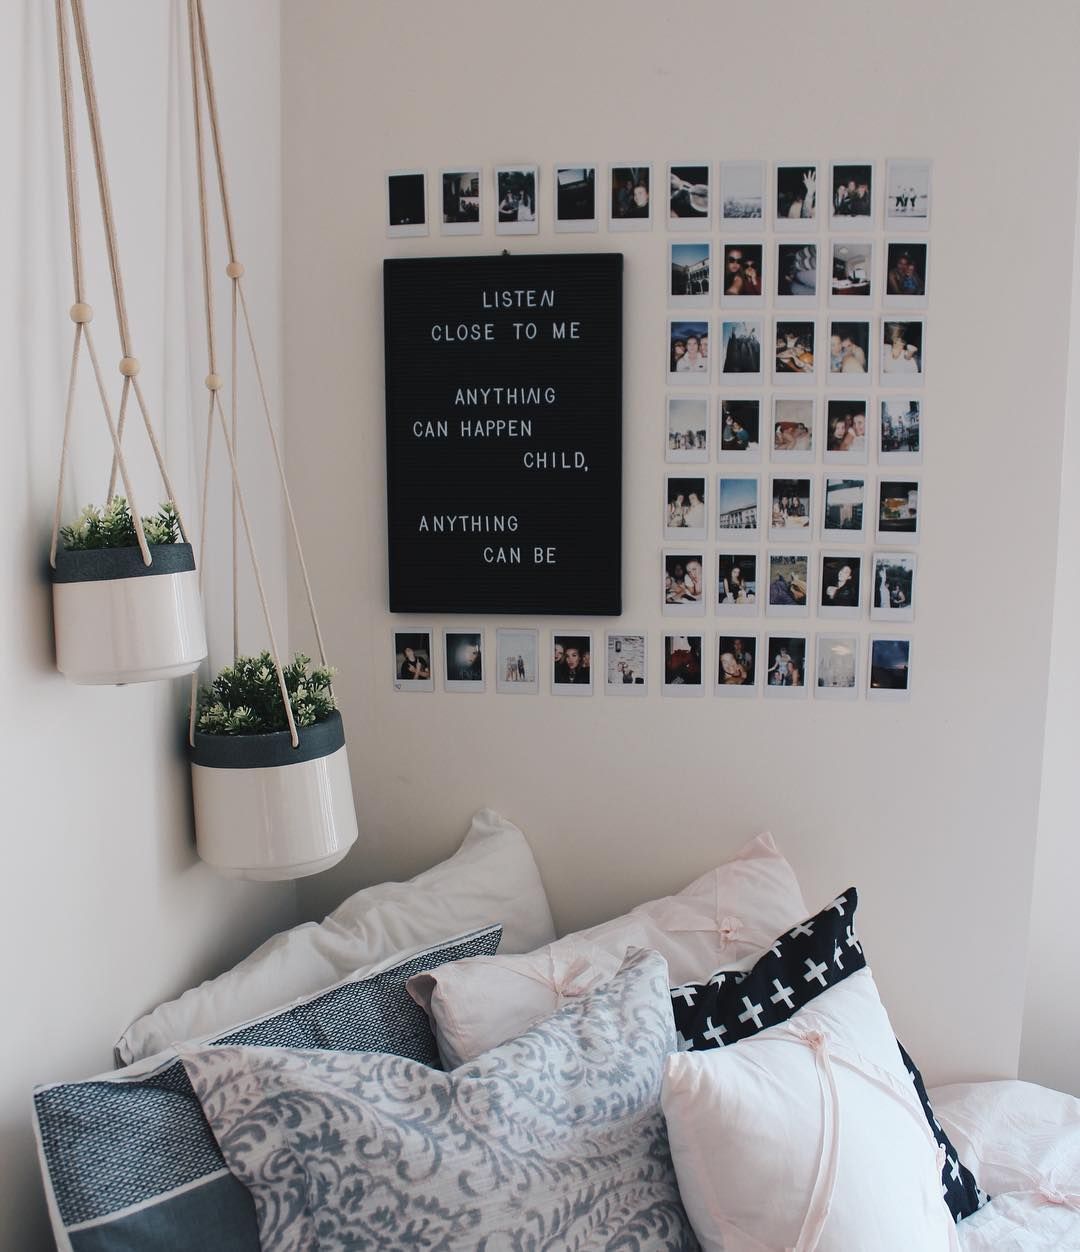 How To Decorate Dorm Room Walls - Temporary Covering Ideas -   18 room decor Simple ideas